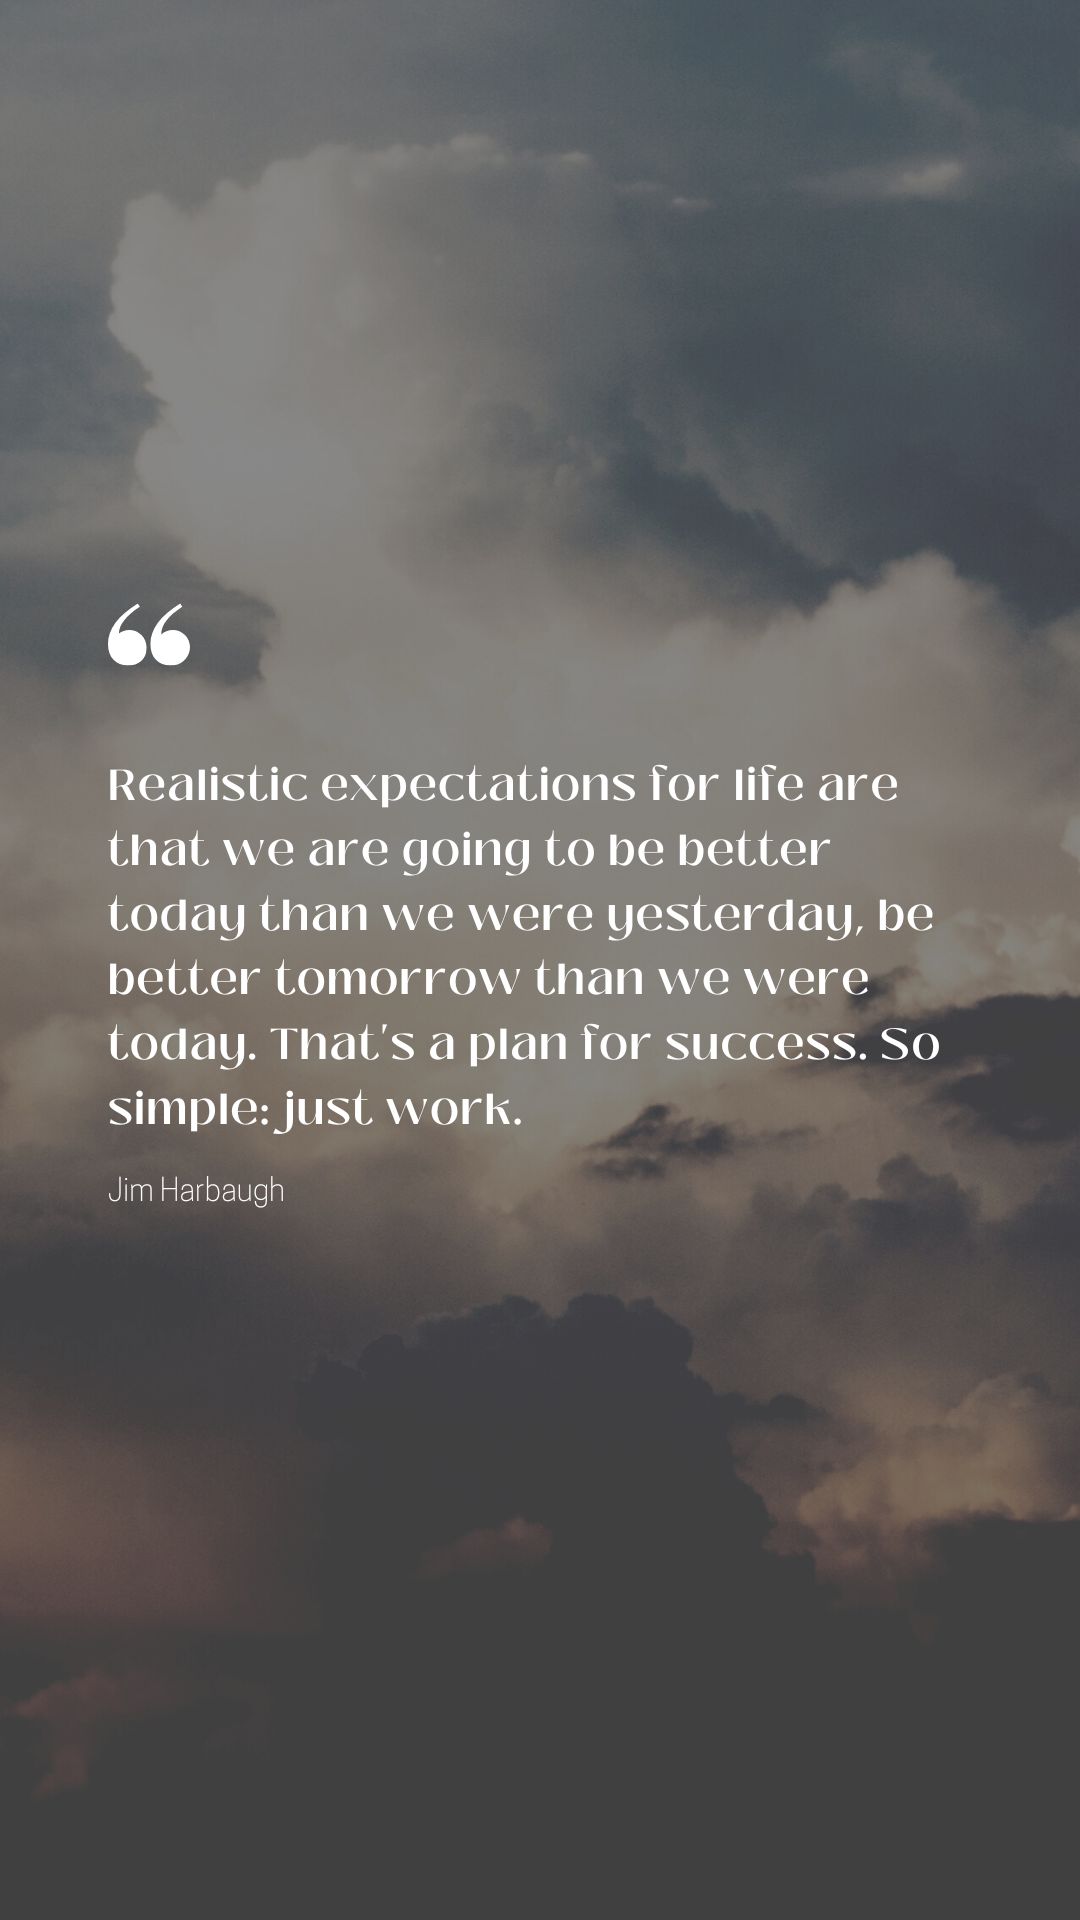 Realistic expectations quotes life better today yesterday plan success Jim Harbaugh